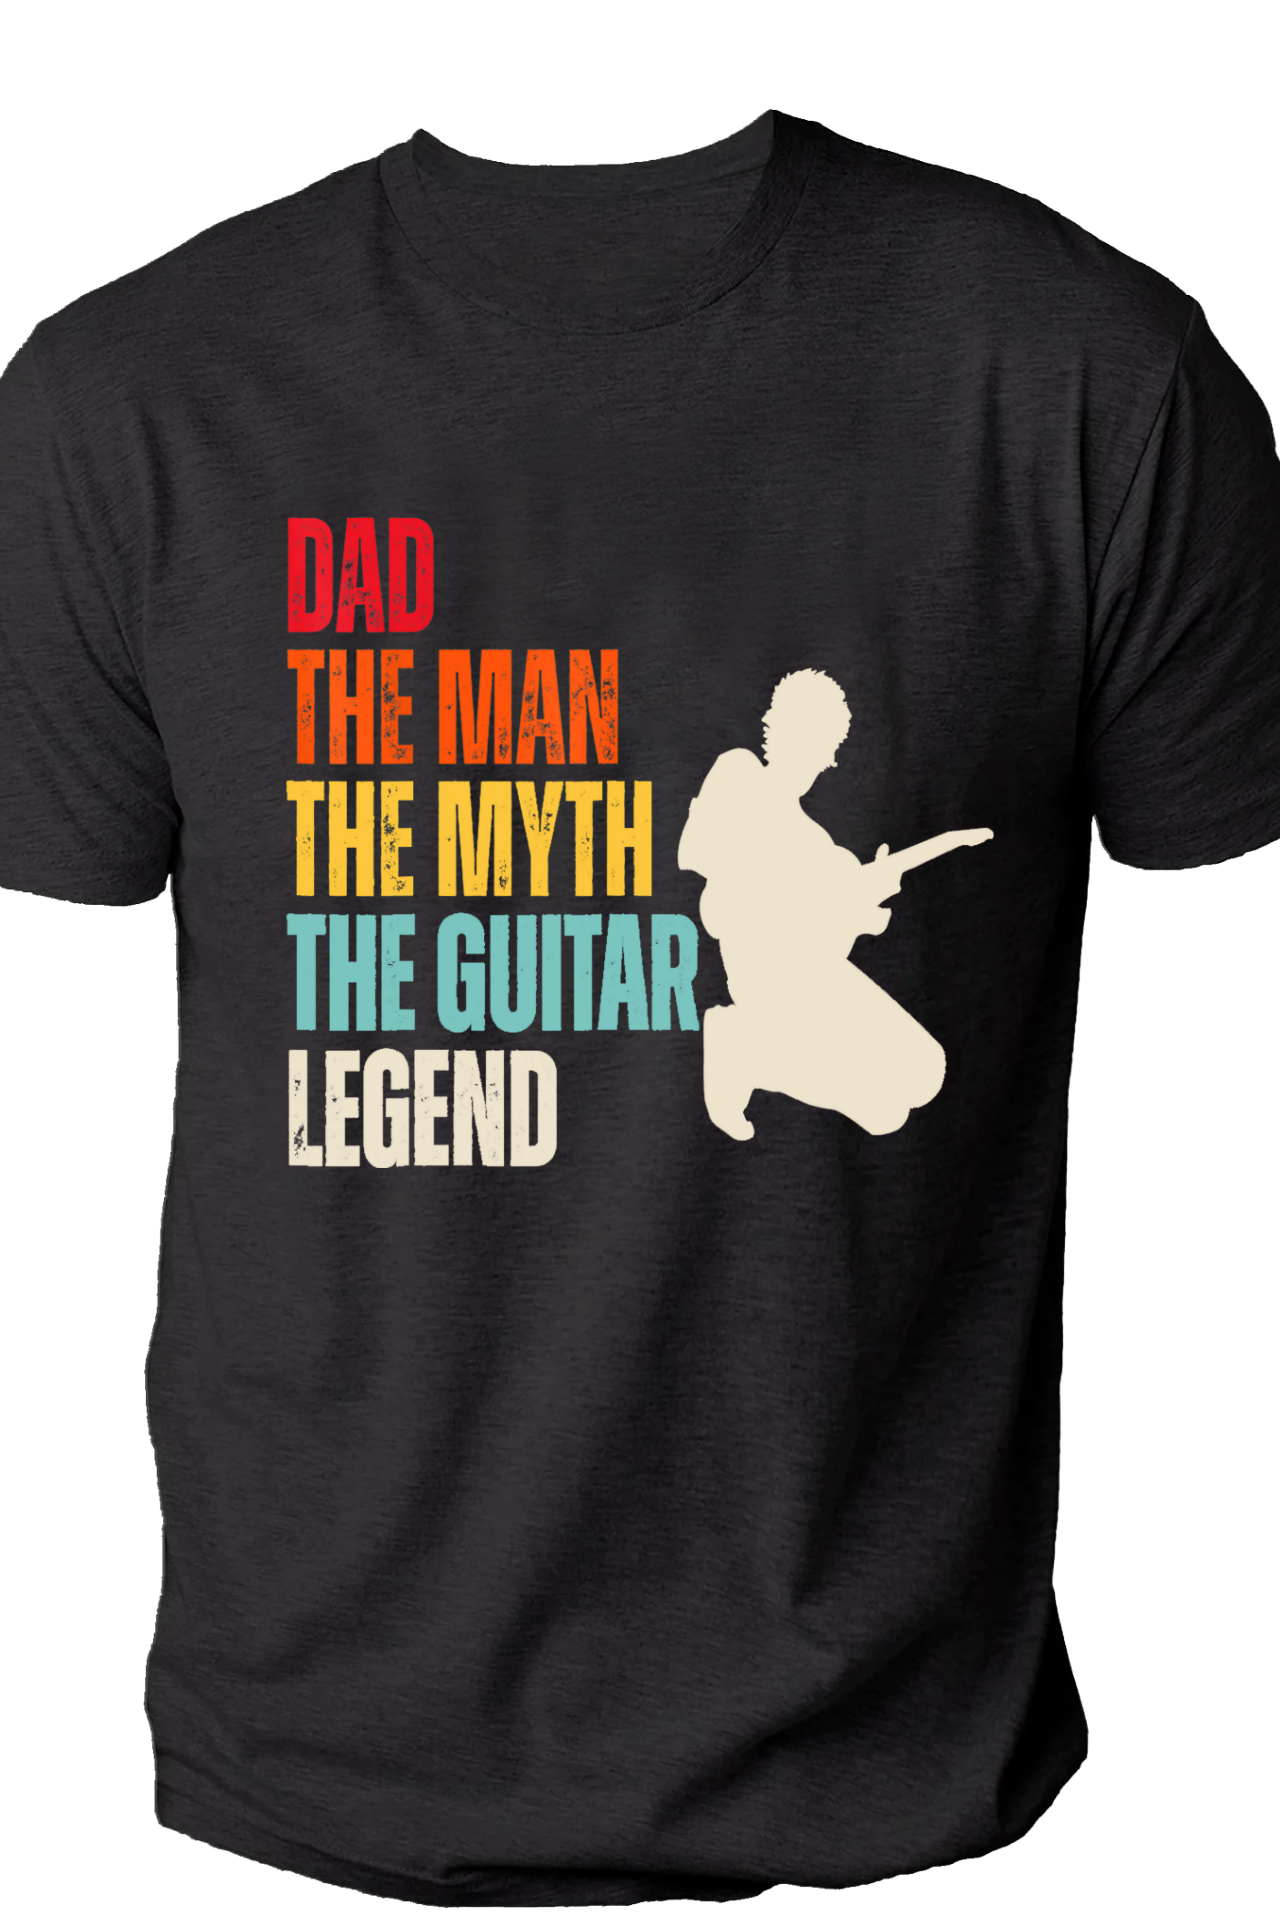 The Man, the Myth, the Guitar Legend  -Deluxe Cotton TShirt